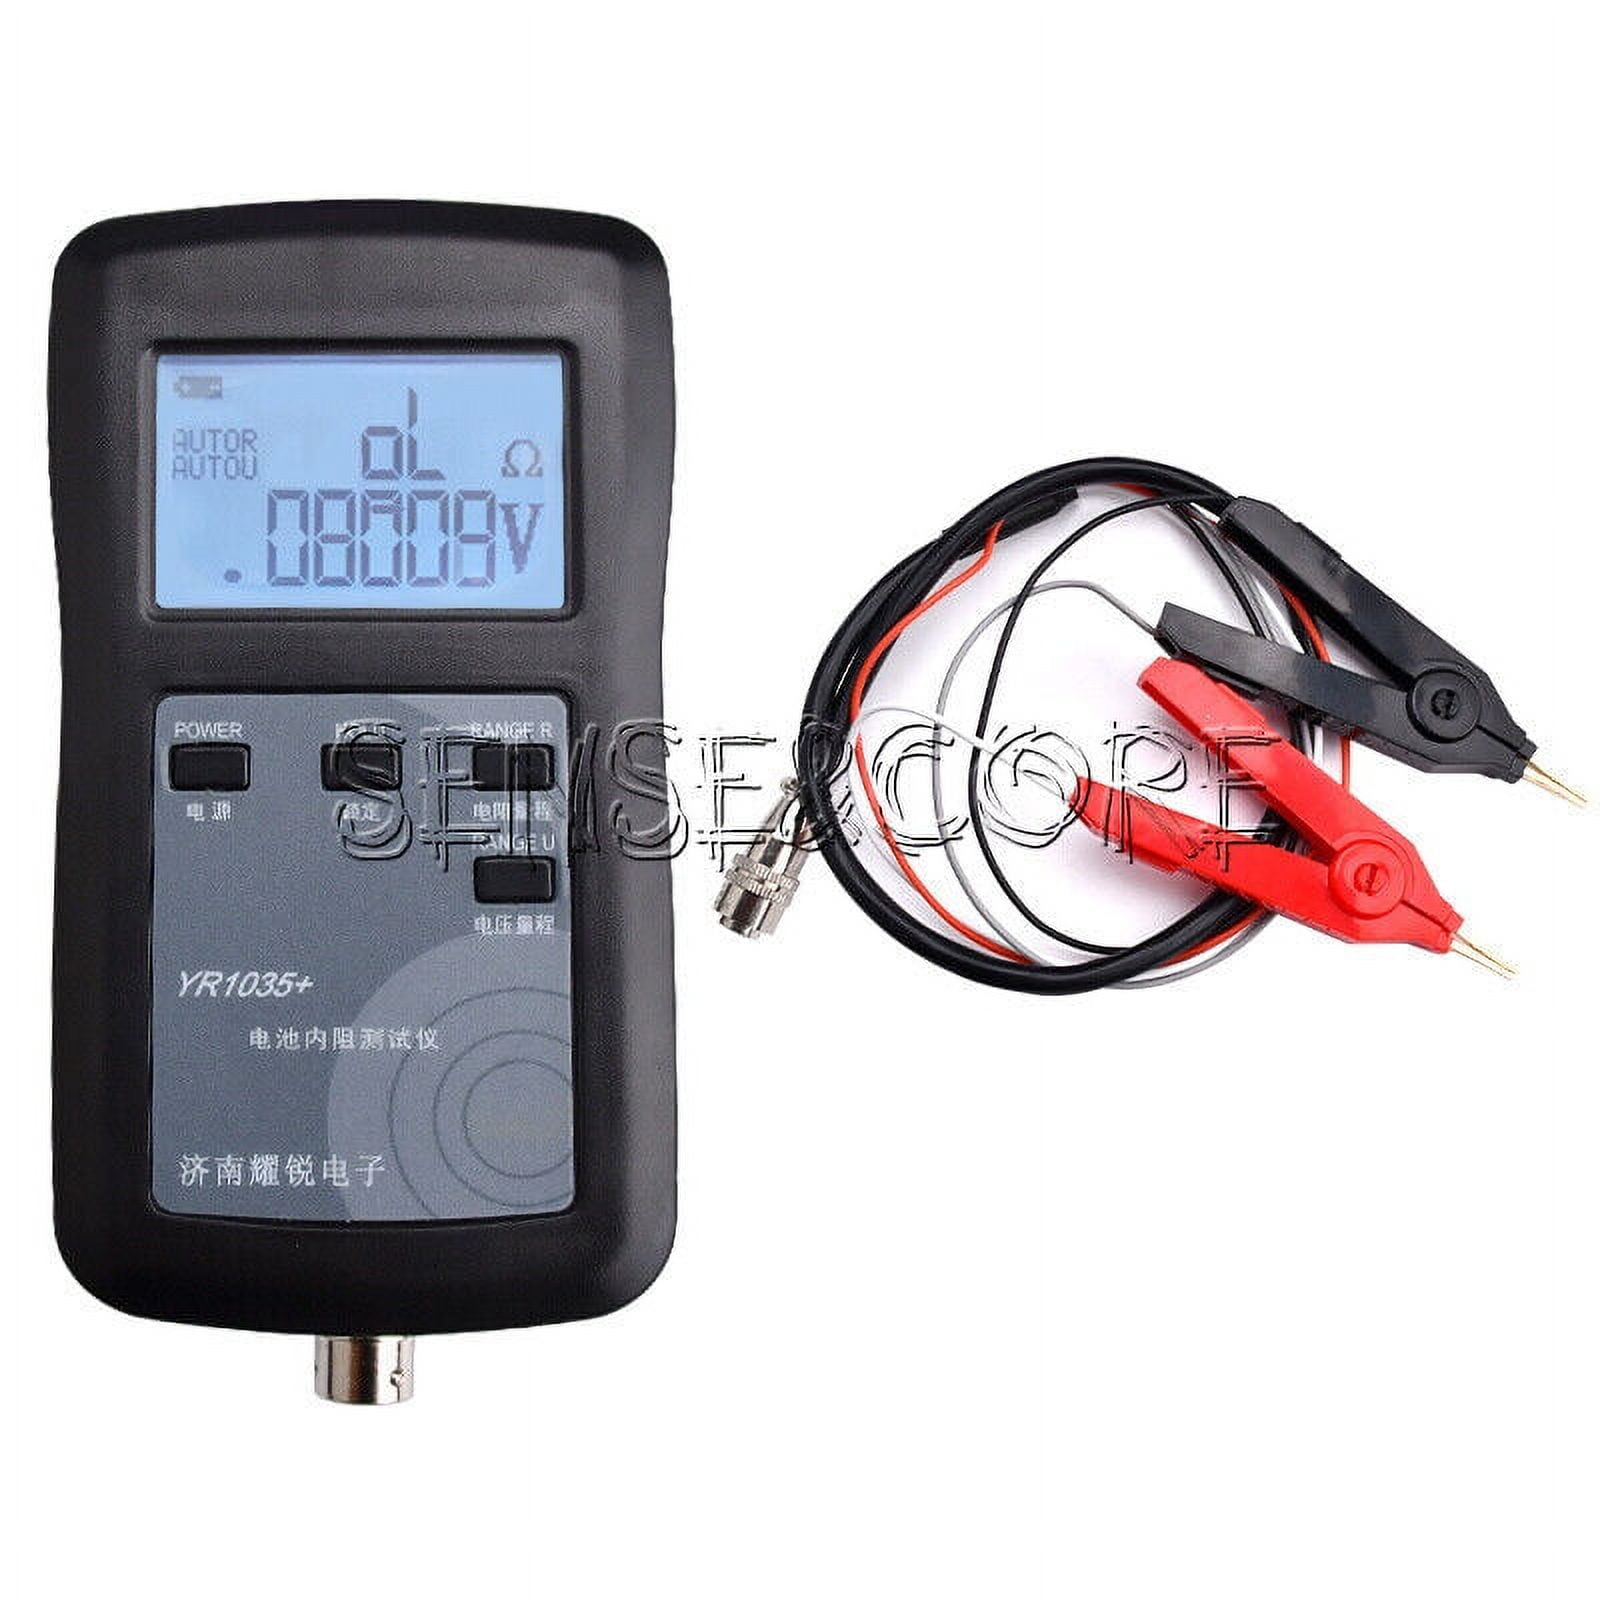 Yr1030+ High Precision Lithium Battery Internal Resistance Tester Nickel  Hydride Button Batteries Battery Tester 28v,200ohms - Voltage Meters -  AliExpress